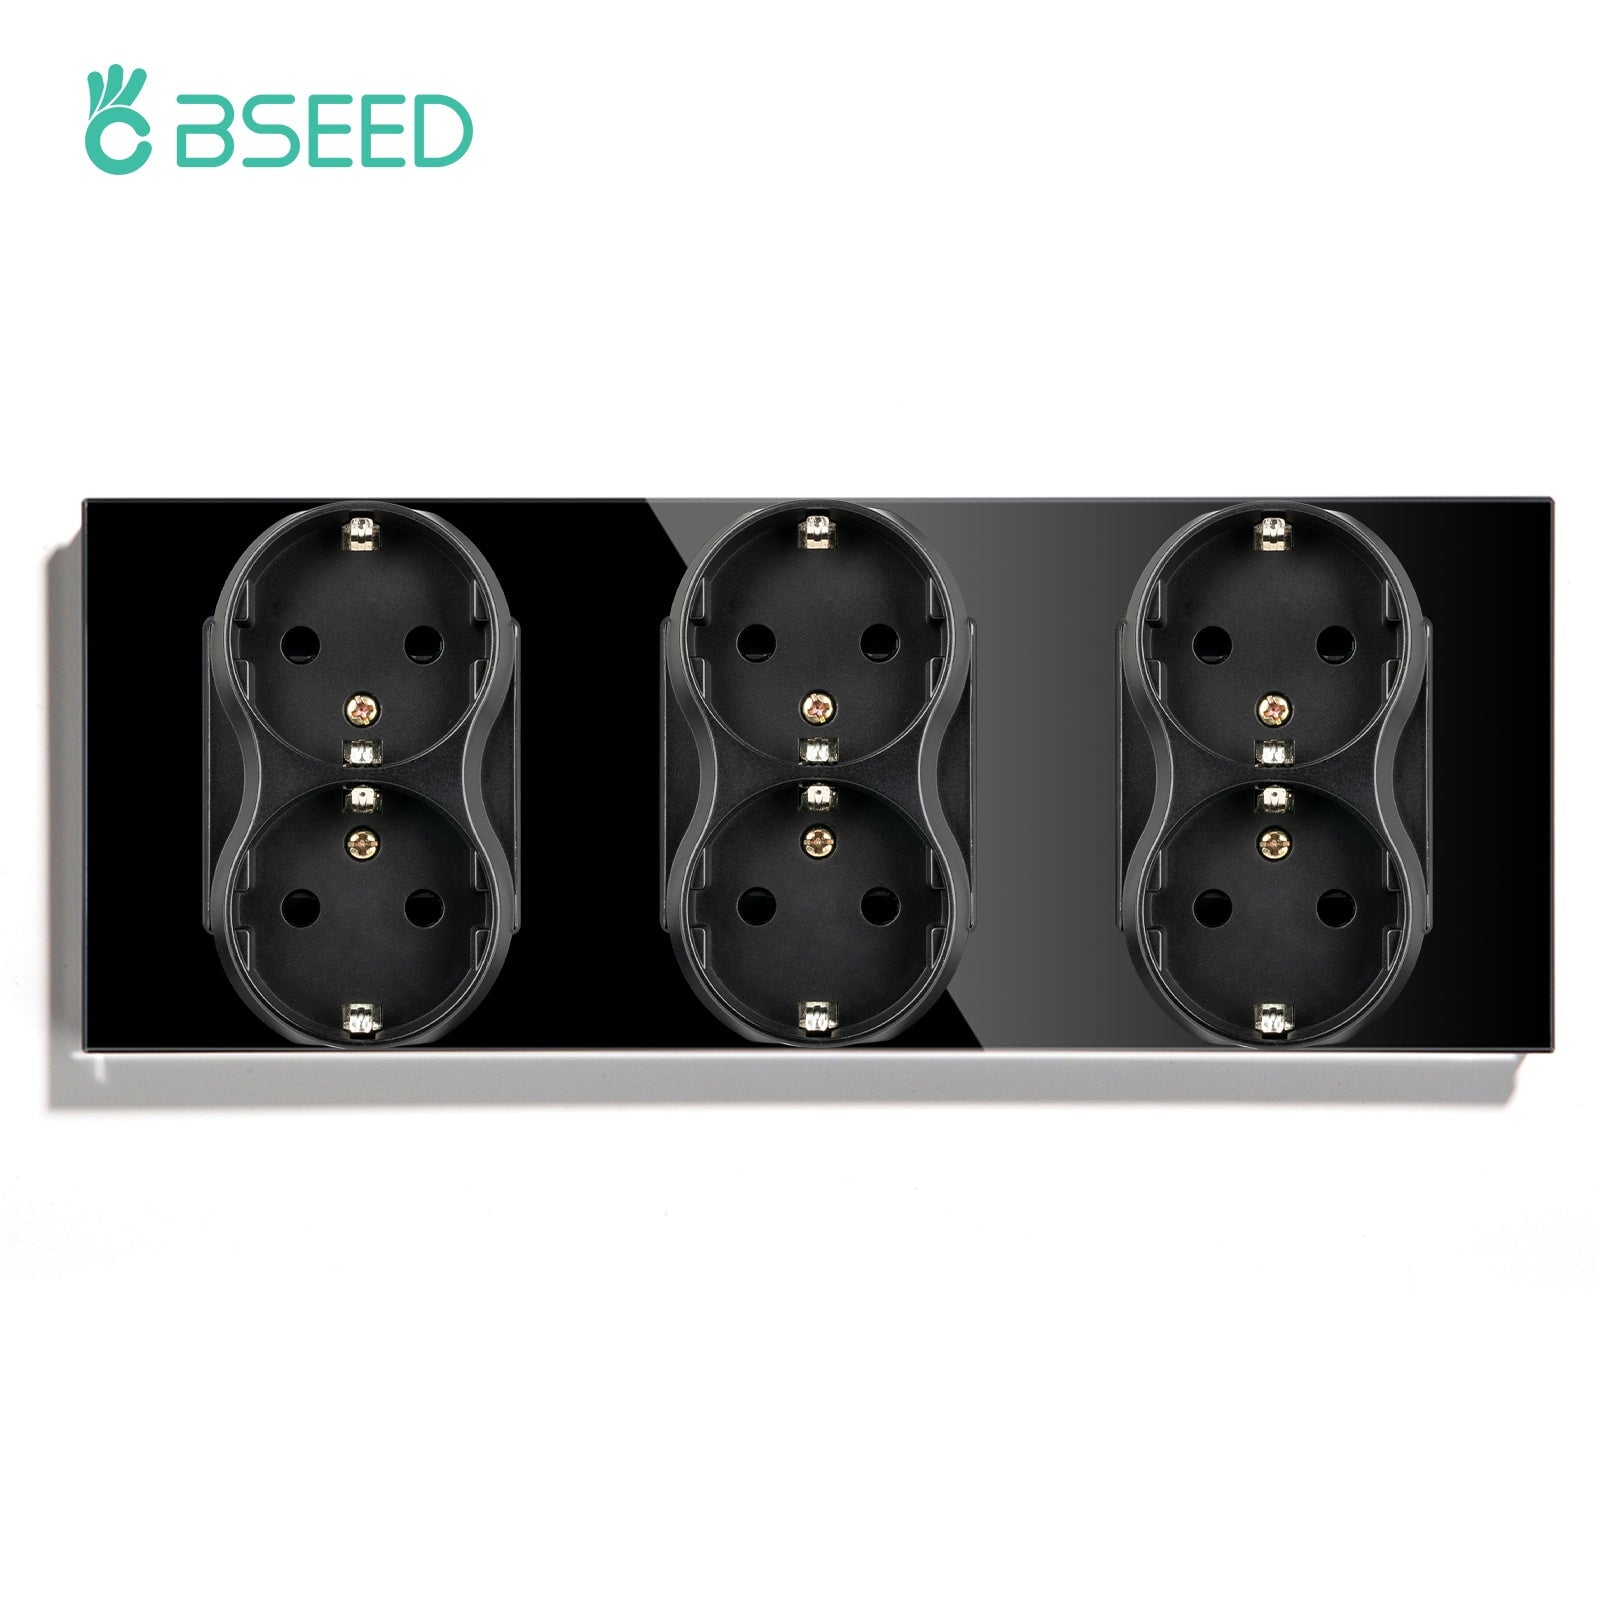 BSEED EU Double Sockets Power Wall Outlet Home Wall Power Sockets Glass Panel Power Outlets & Sockets Bseedswitch Black Triple 